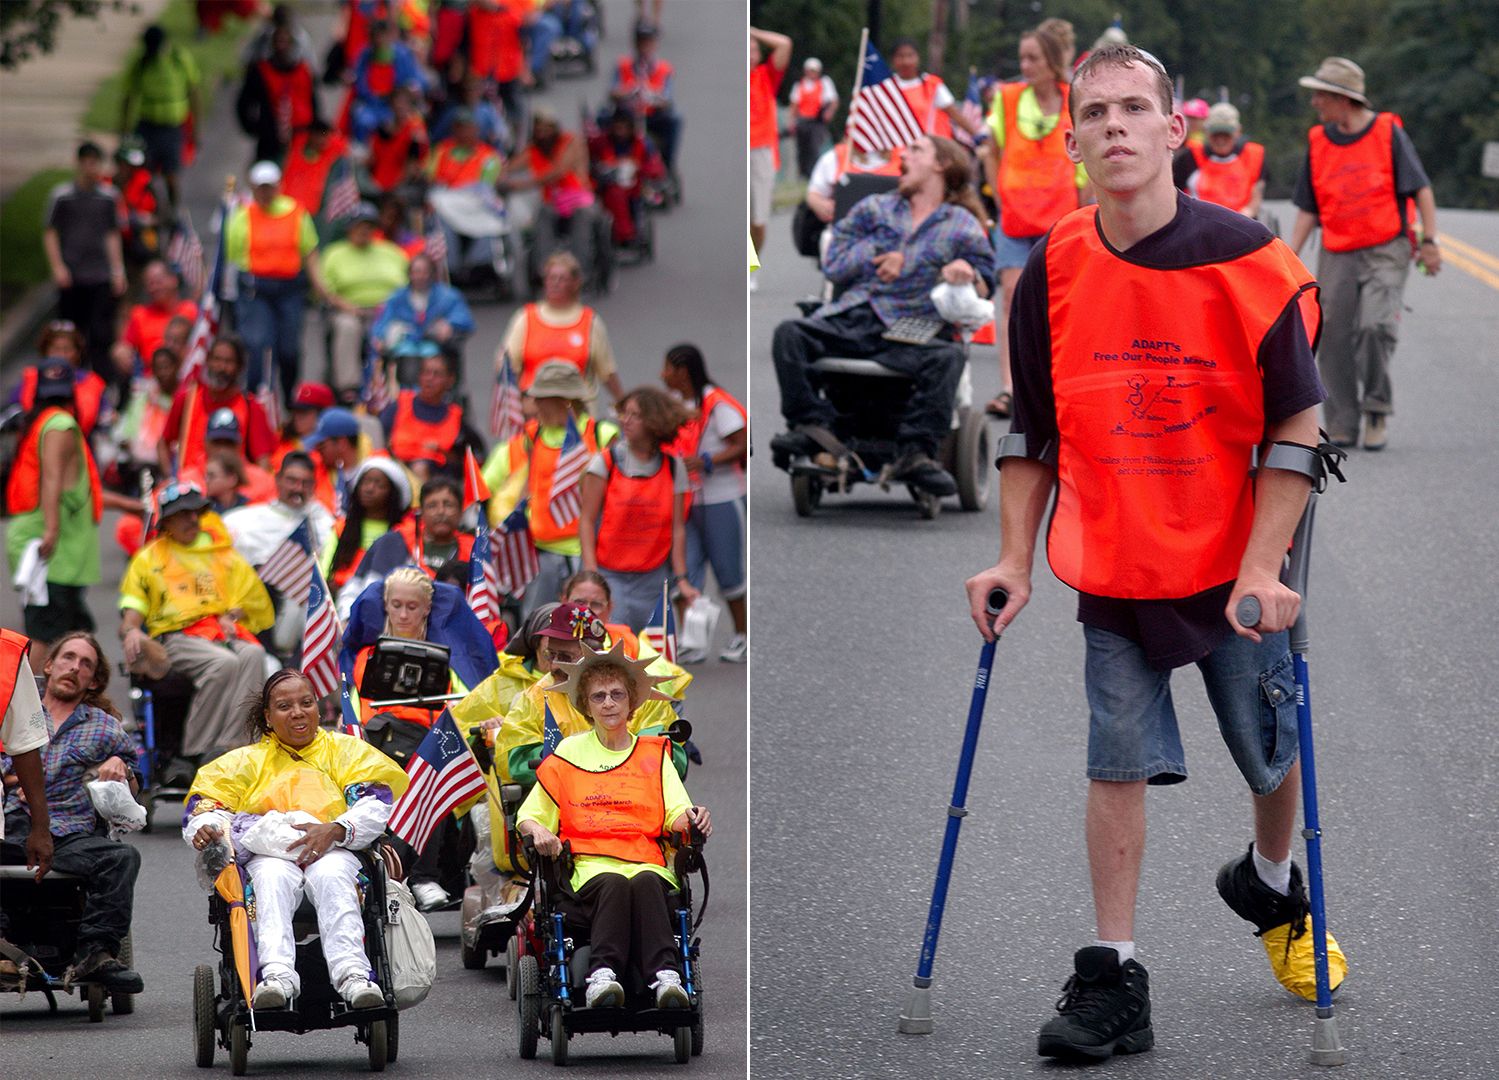 Diptych: On the left are people in wheelchairs running down the street. Right: A person walking down the street using braces.